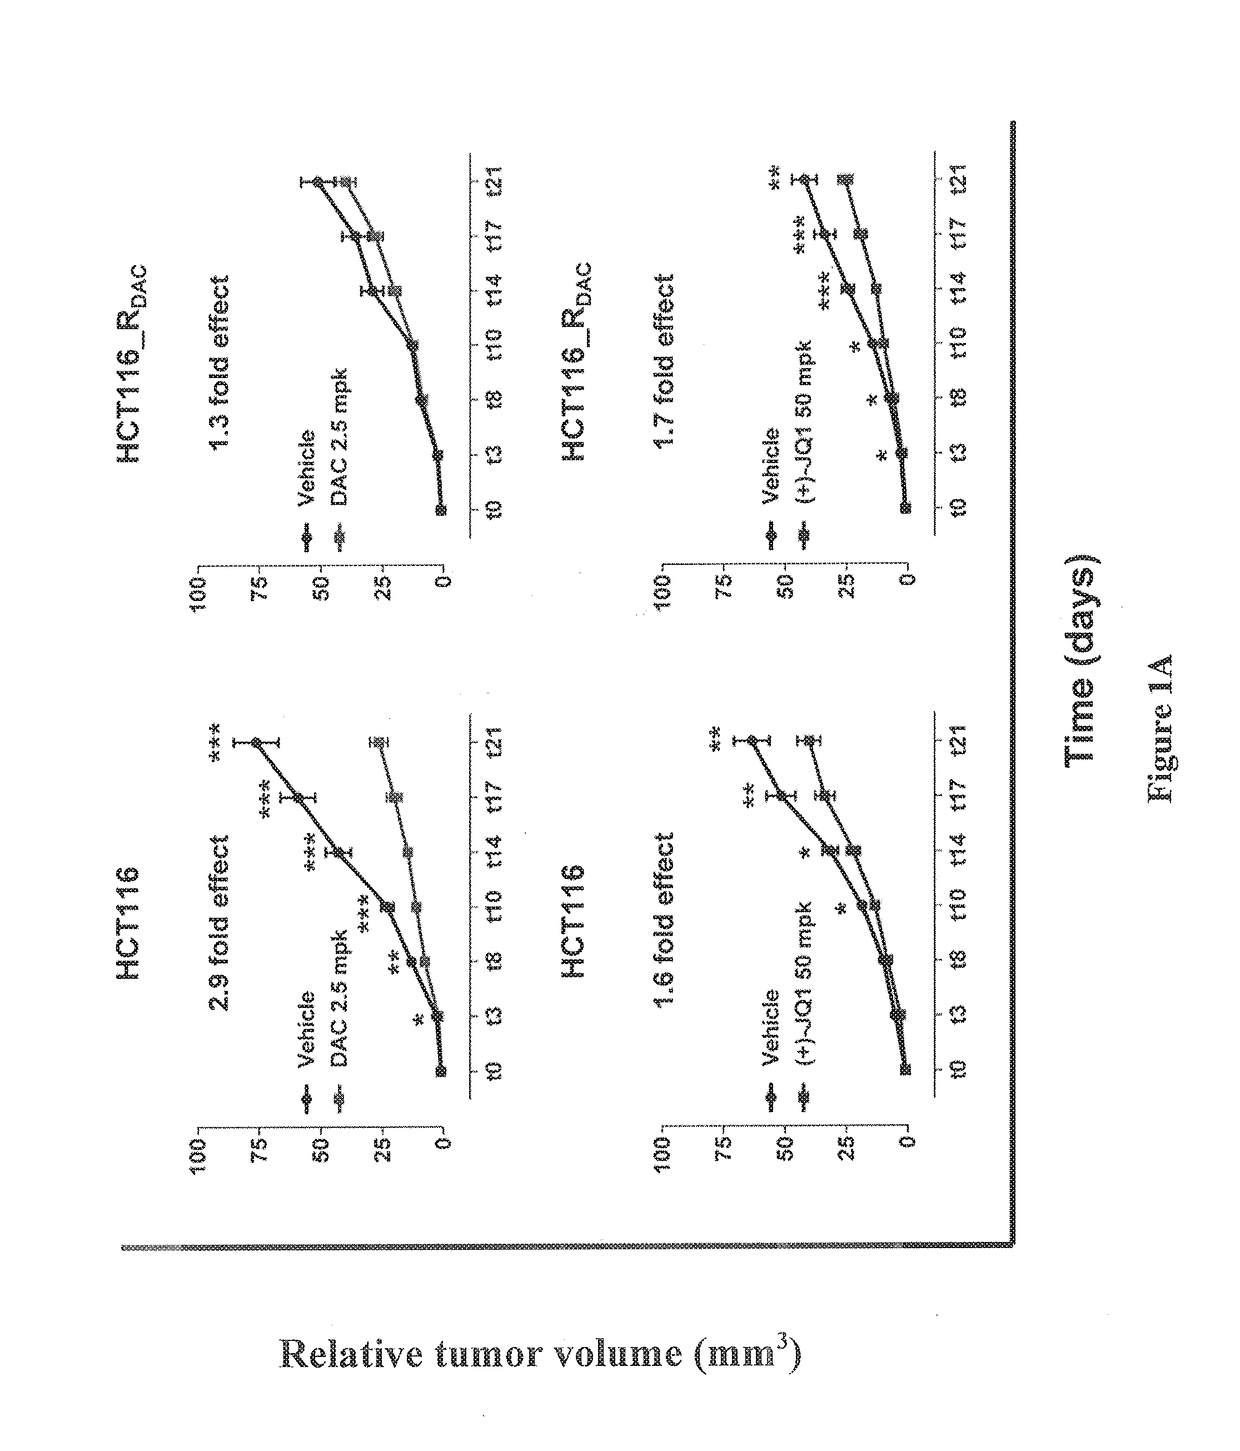 Method of predicting the tumor response to DNA methylation inhibitors and alternative therapeutic regimen for overcoming resistance